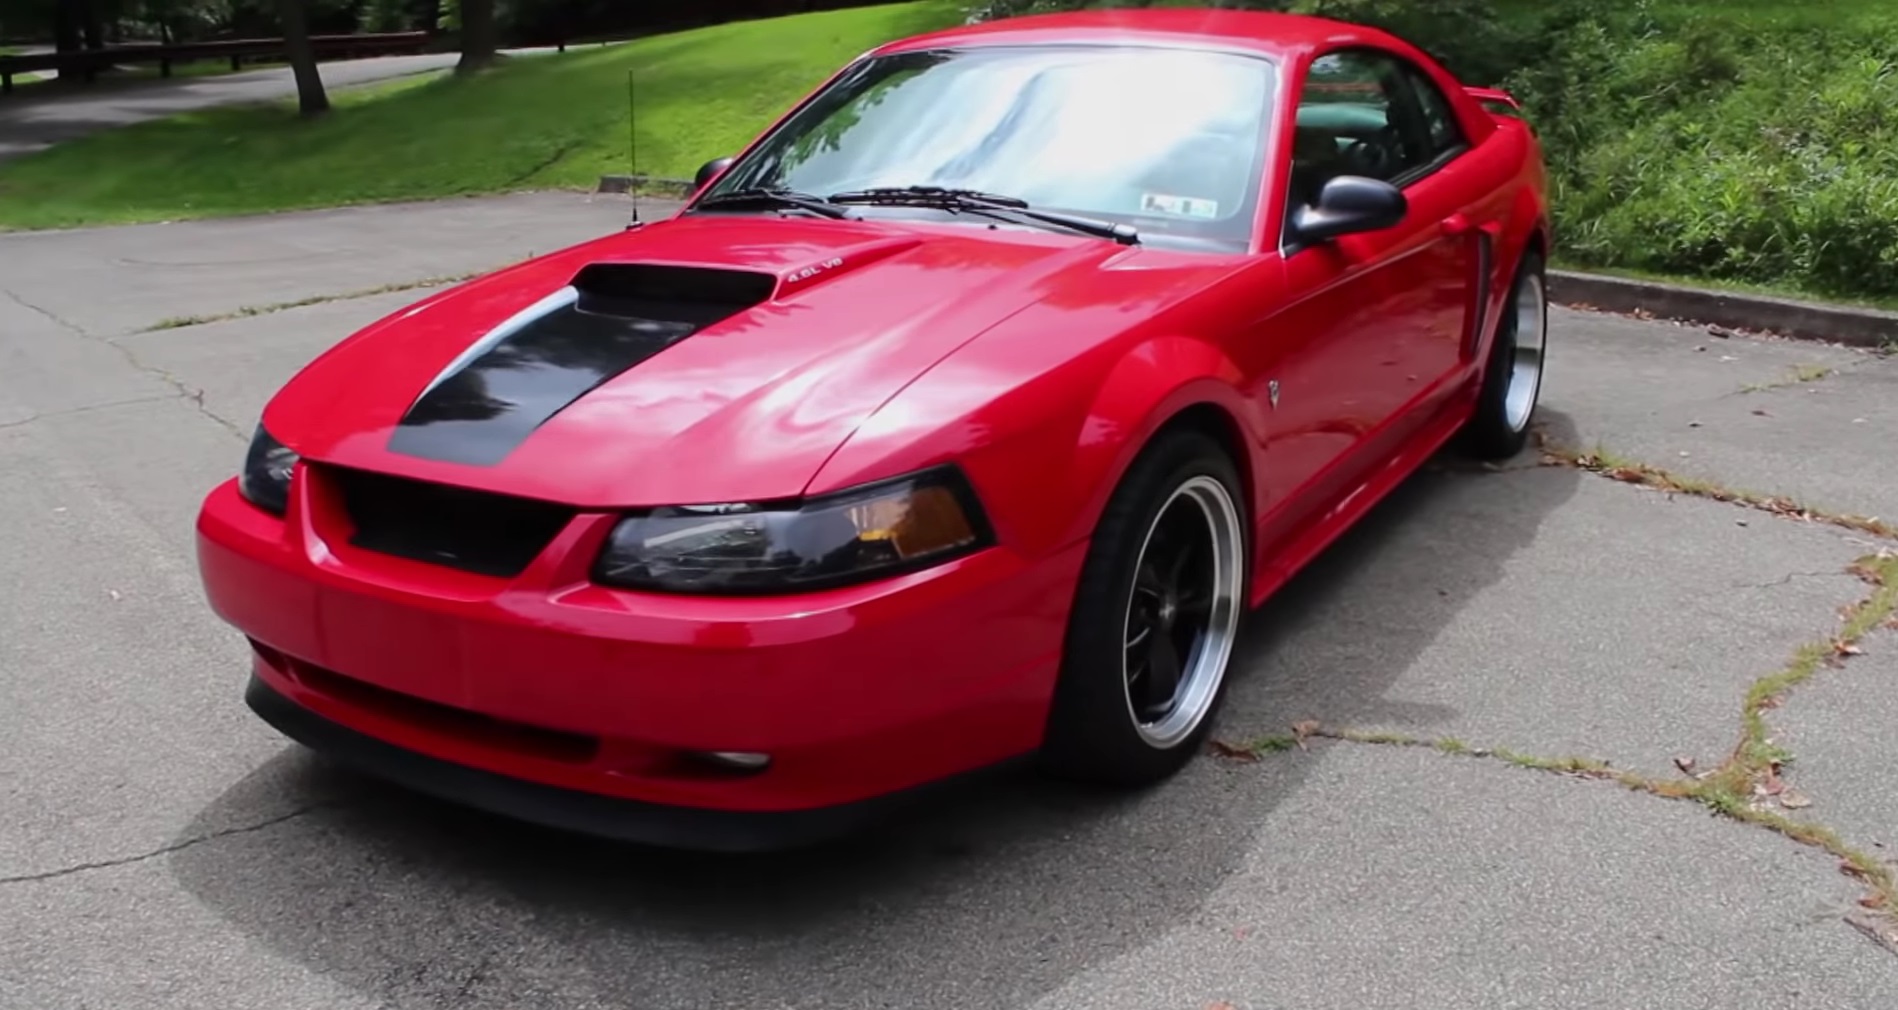 Video: Reviewing A 2002 Ford Mustang GT With Flowmaster Exhaust